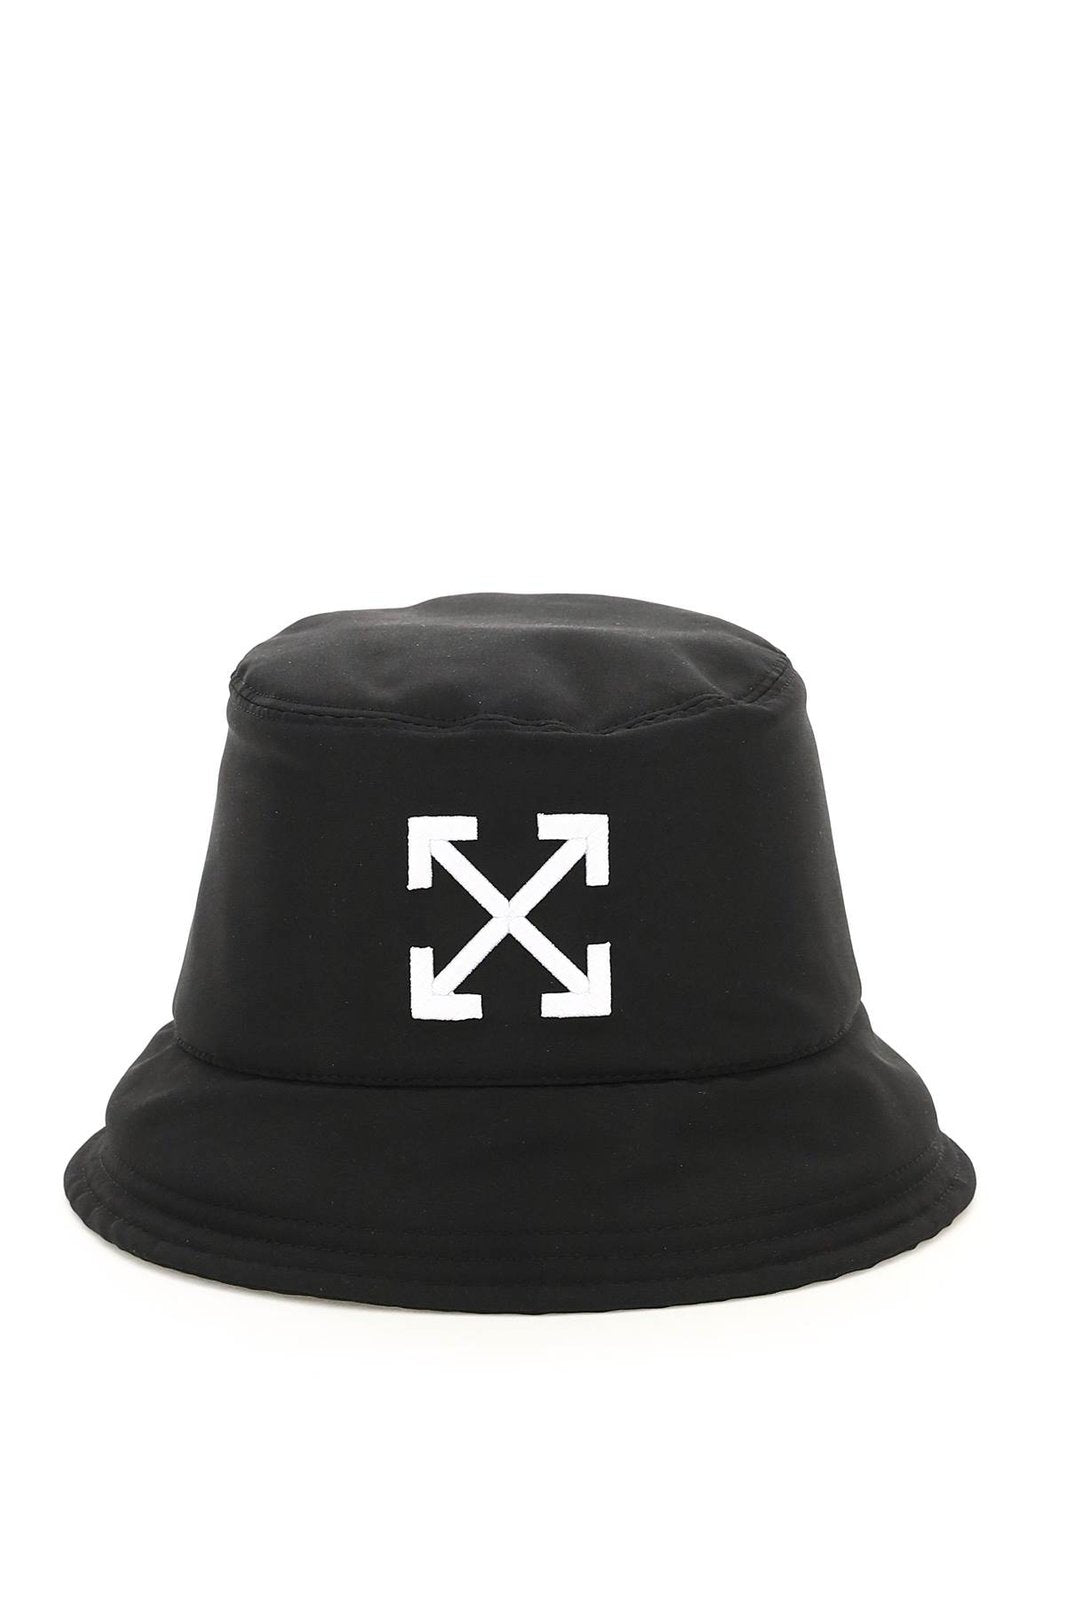 Off-White Logo Embroidered Bucket Hat